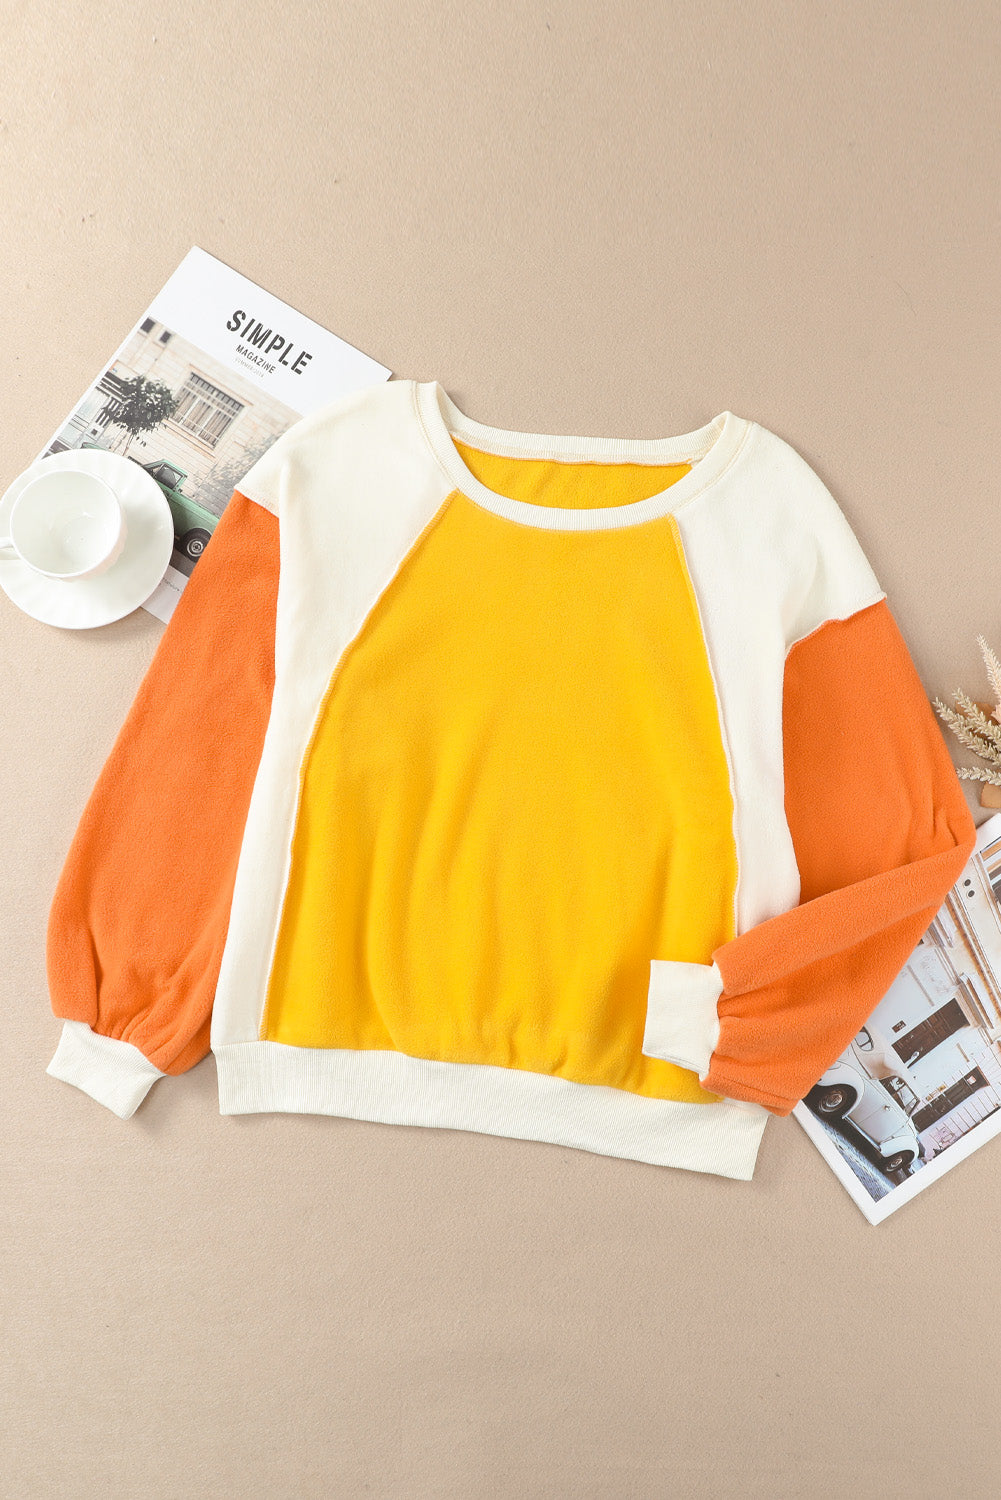 Round Neck Dropped Shoulder Color Block Sweatshirt Print on any thing USA/STOD clothes